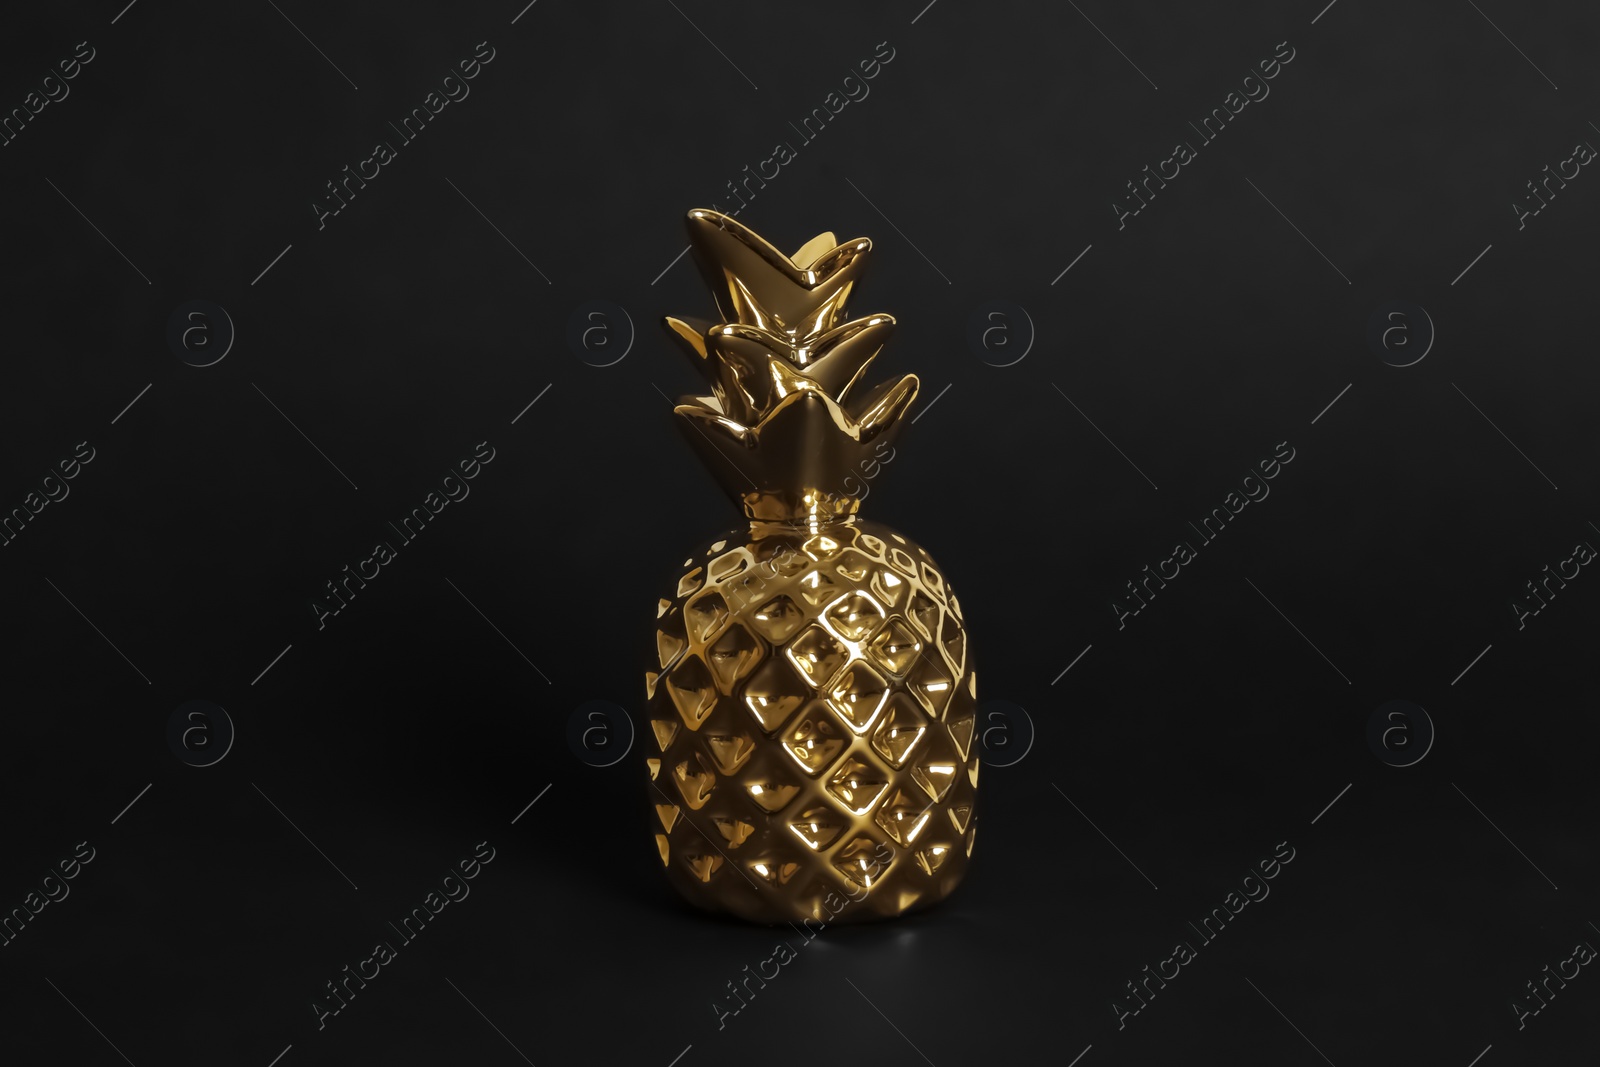 Photo of Gold metal decorative pineapple on black background